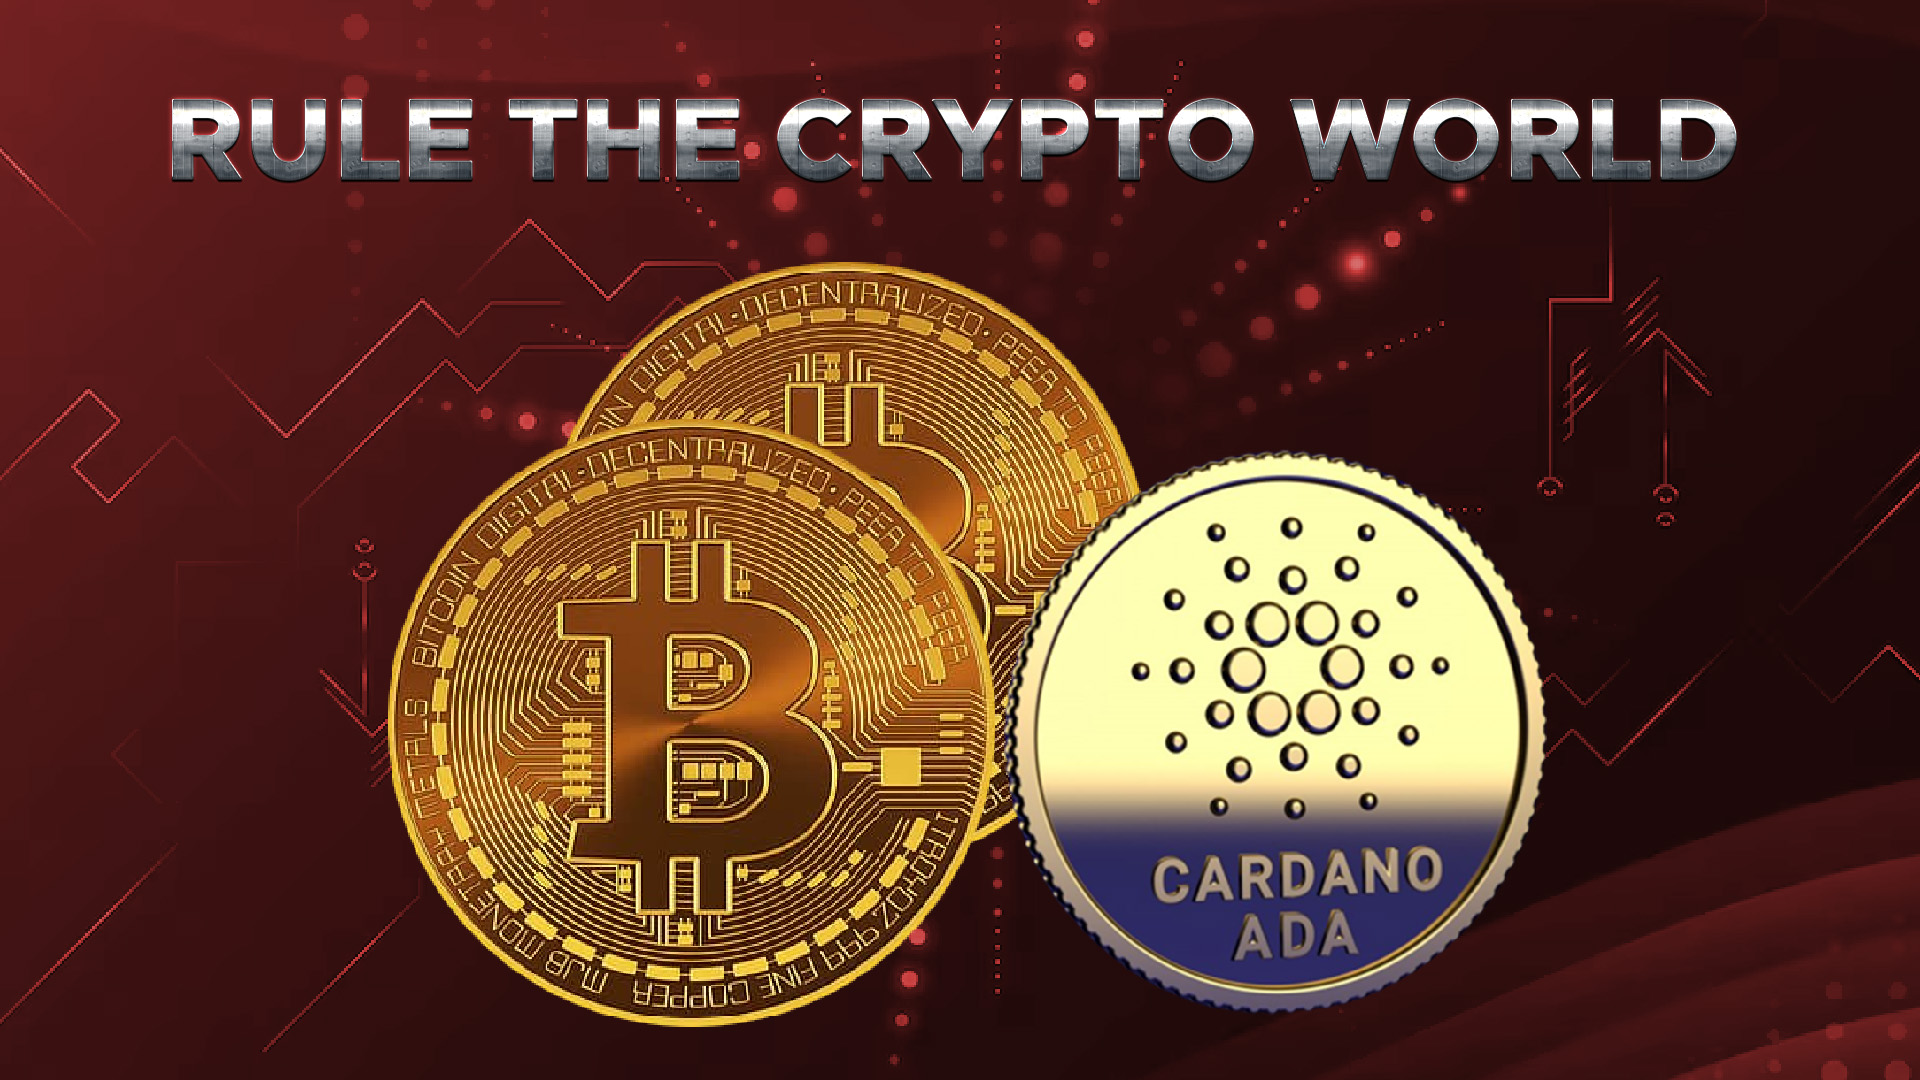 What is Cardano and Why it can rule the crypto world in future